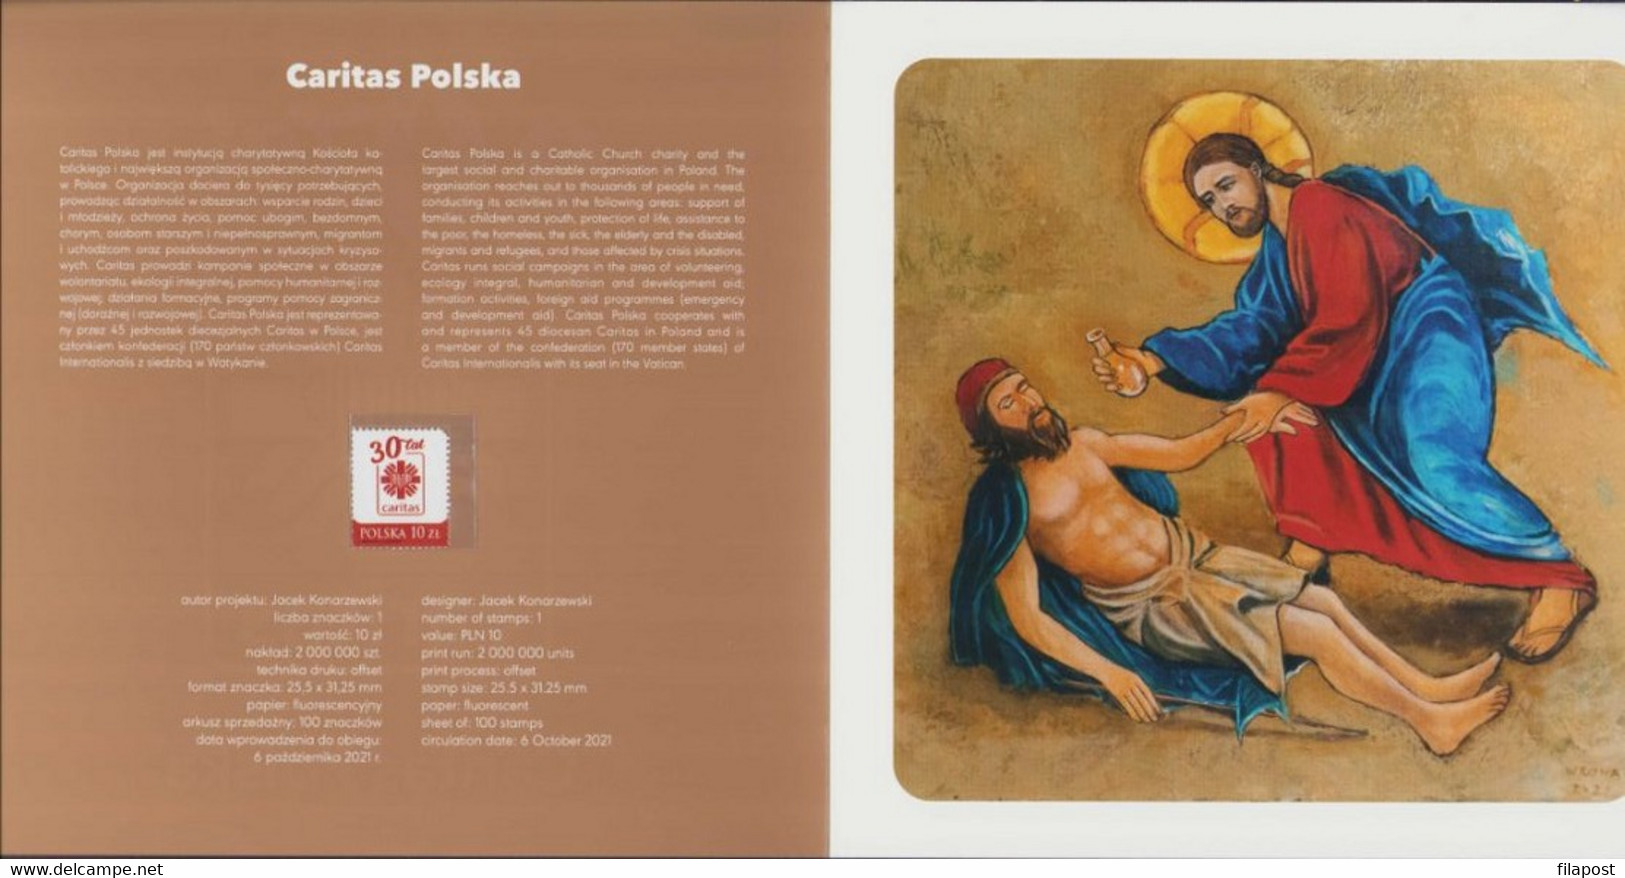 Poland 2021 Booklet / Caritas Polska, Organisation, Charity Institution, Church, Catholic Relief / With Stamp MNH** New! - Booklets